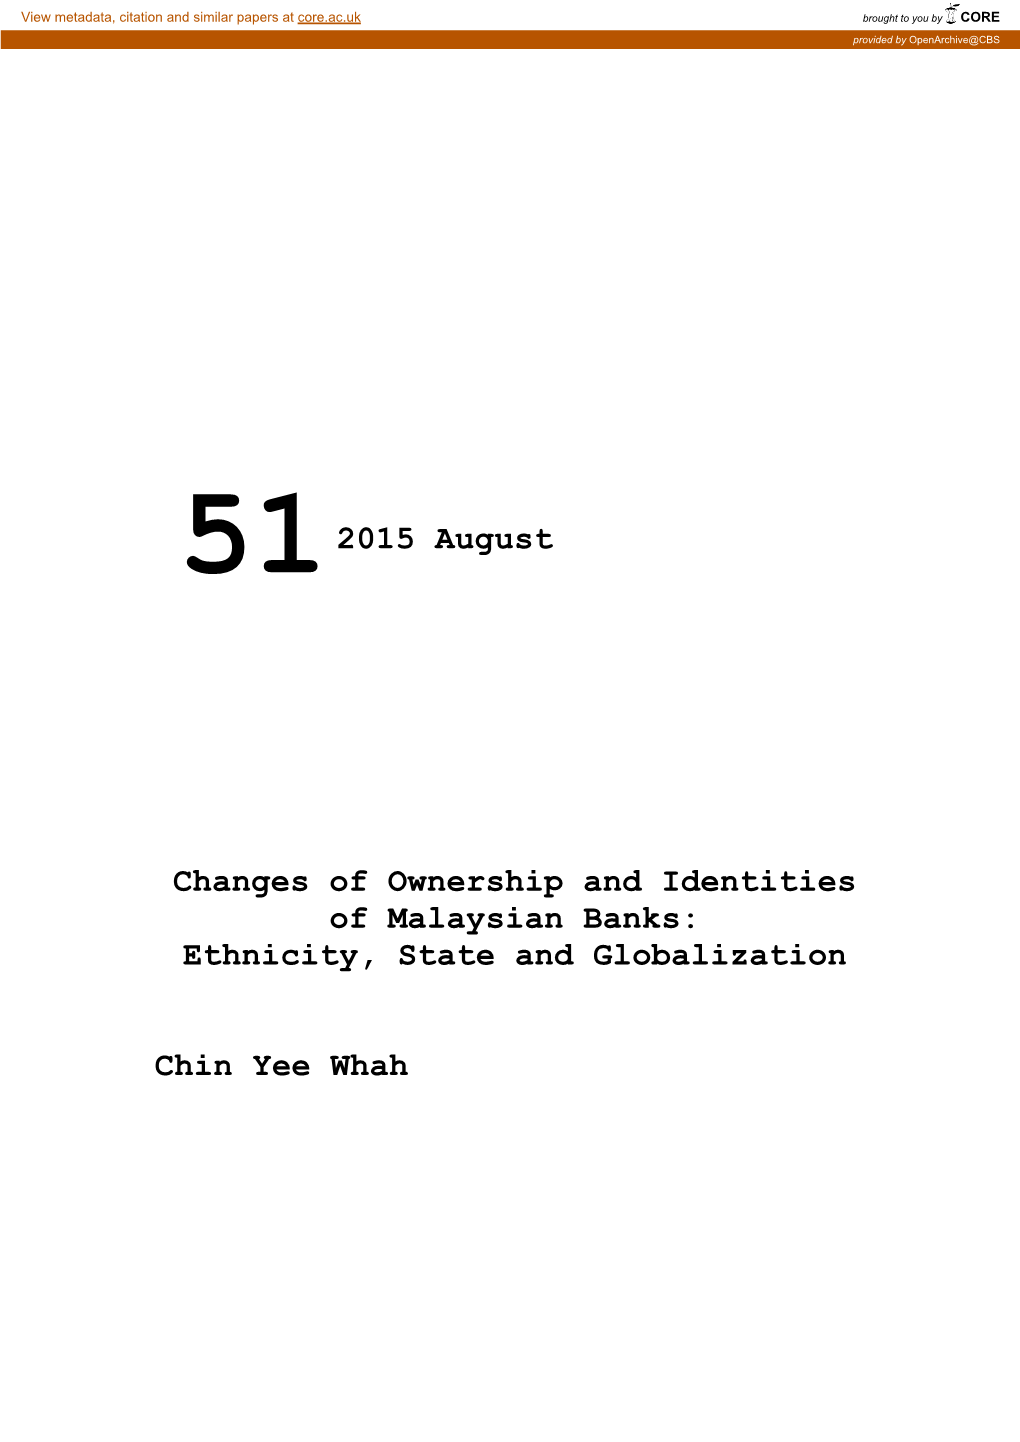 512015 August Changes of Ownership and Identities Of